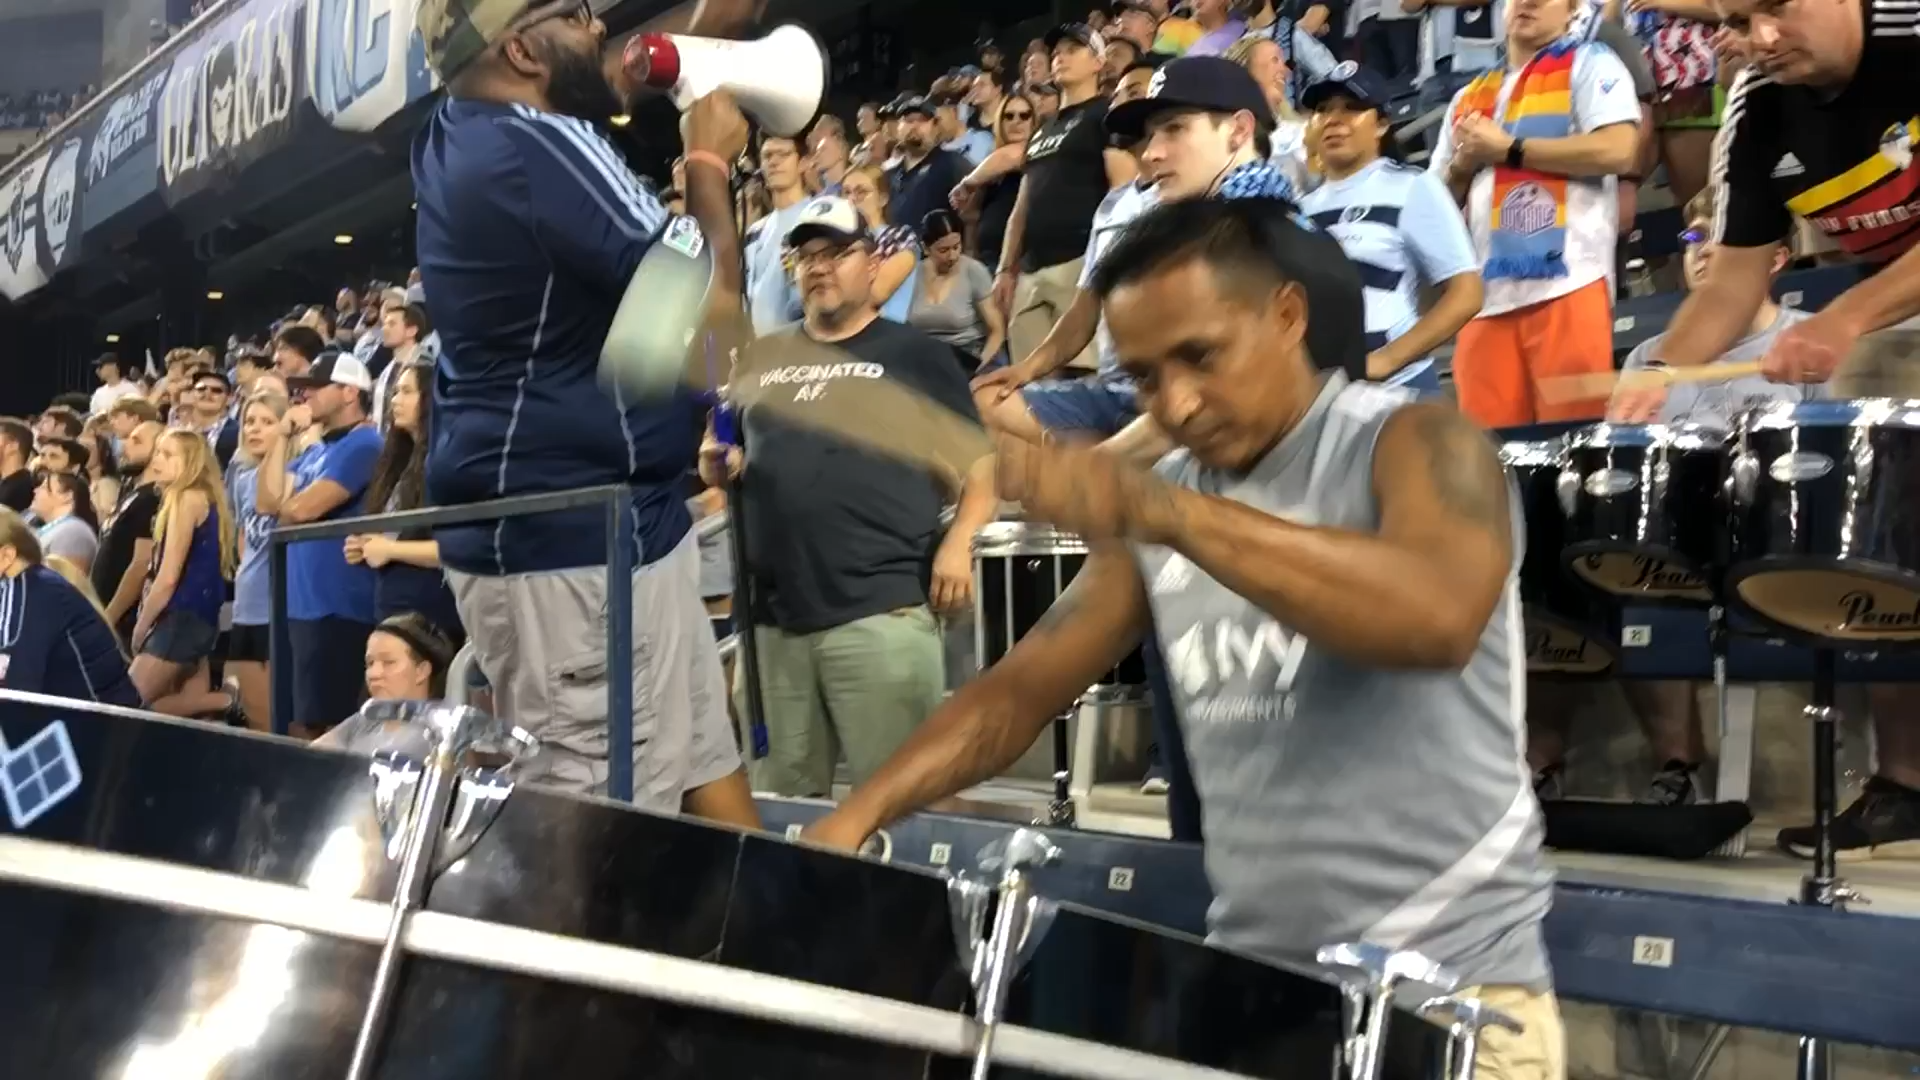 A fan holds up a scarf towards the Sporting Kansas City players